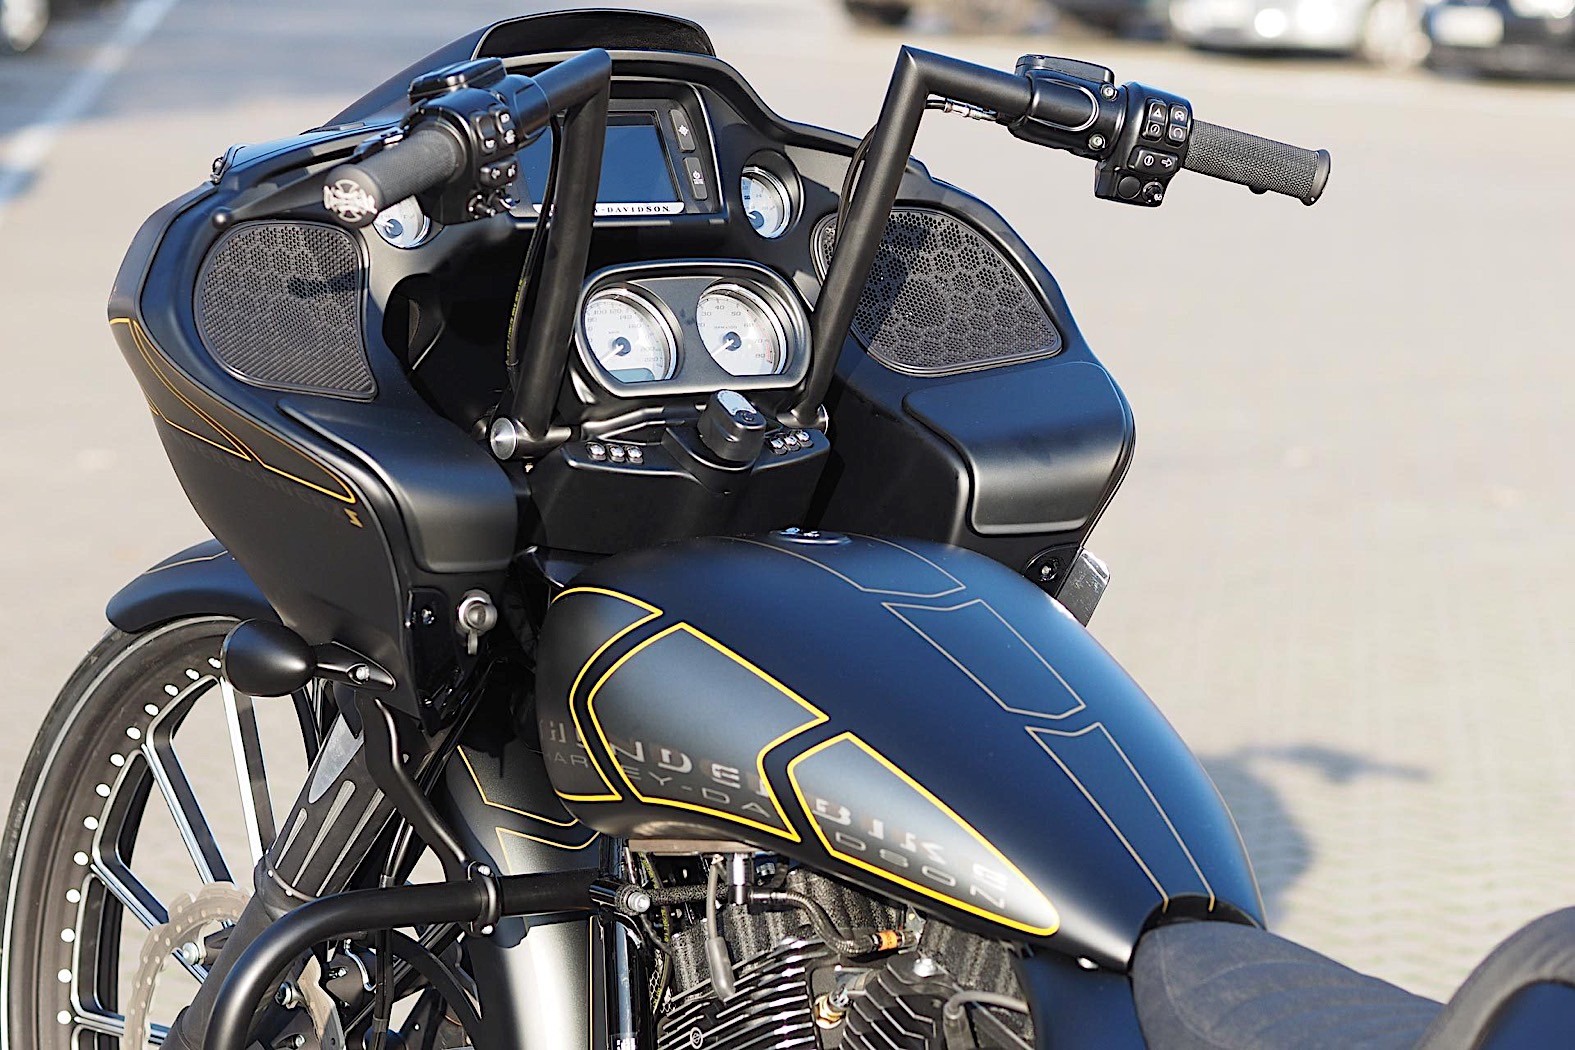 $14K of Custom Parts Turn a Harley-Davidson Road Glide Into the 